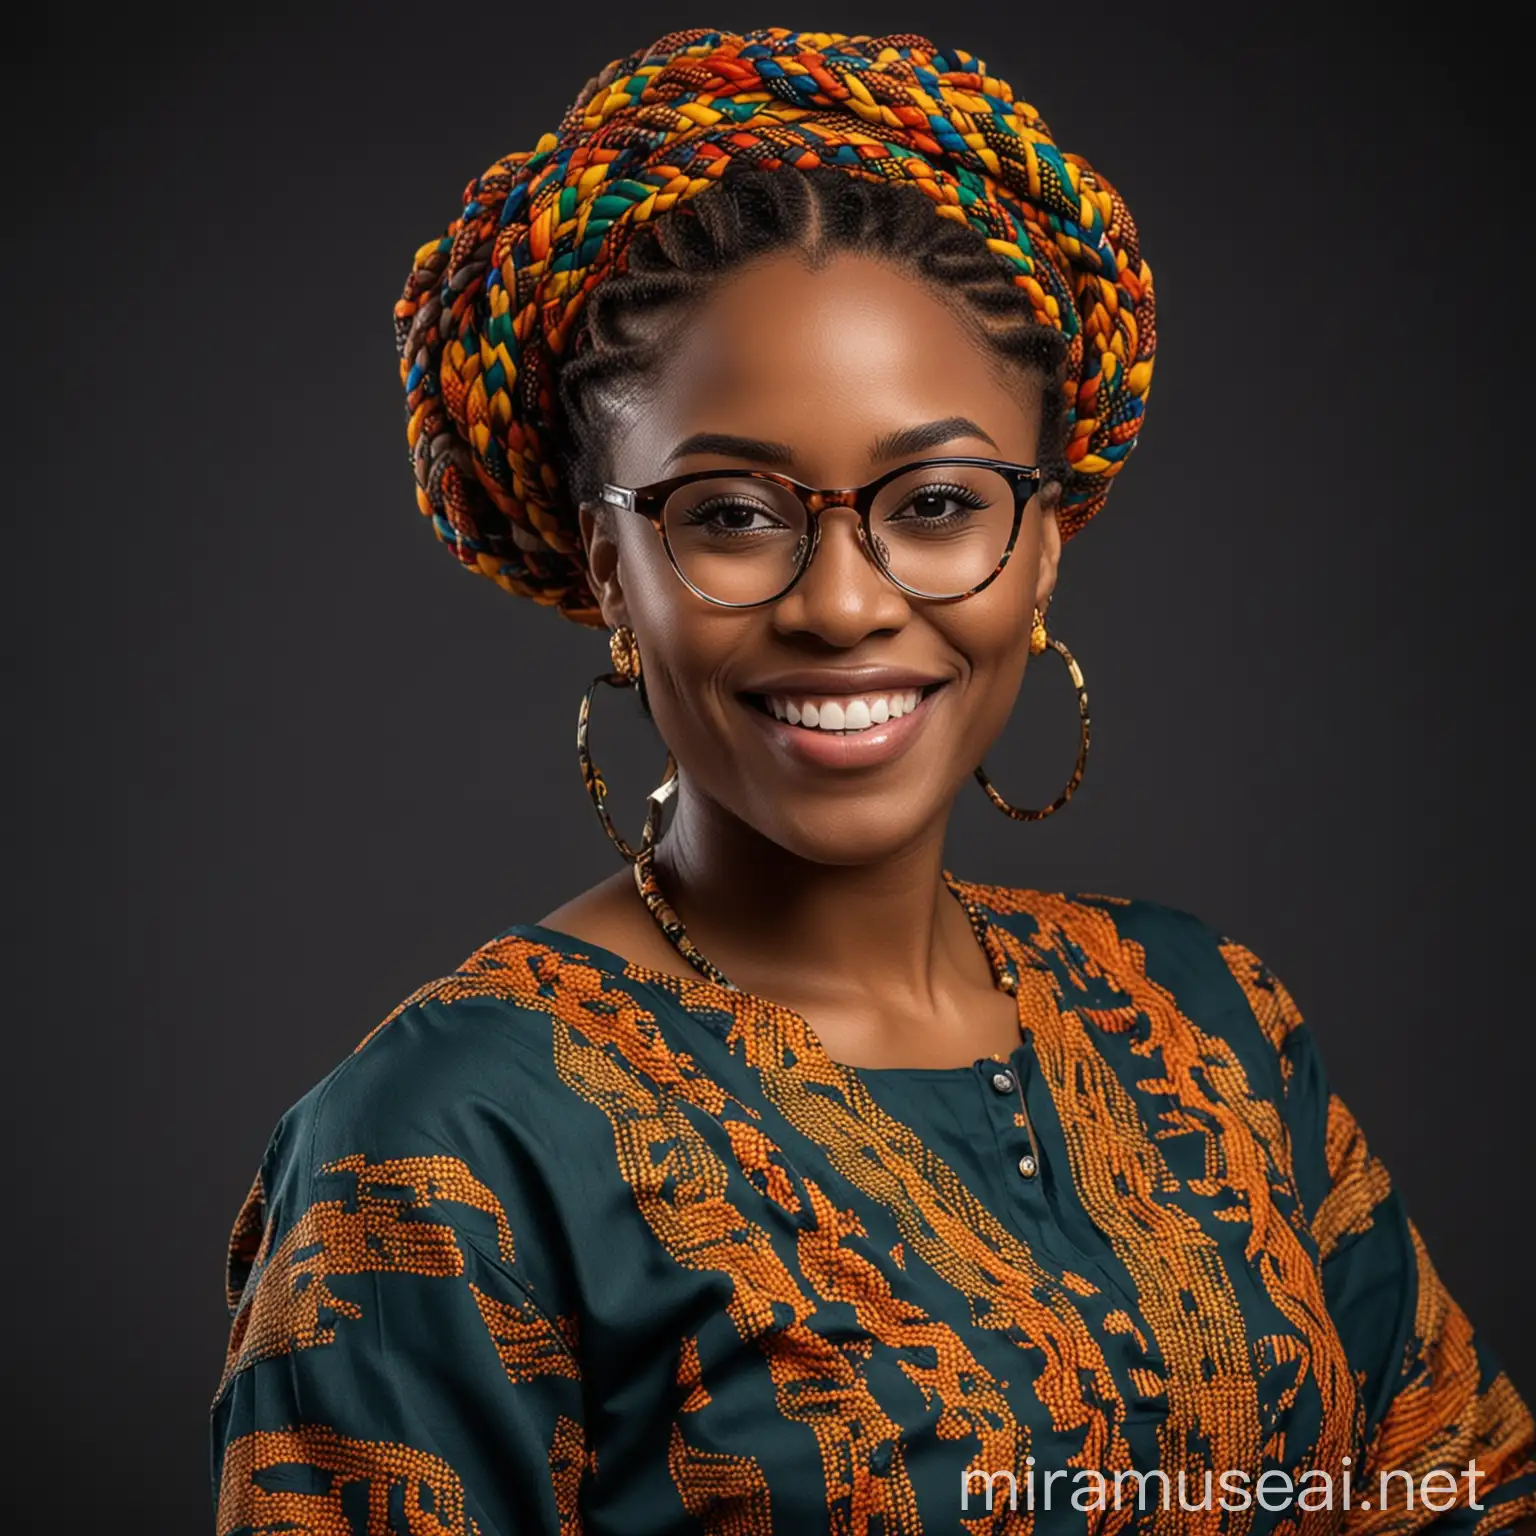 Beautiful Nigerian Woman in Traditional Attire and Glasses Smiling Seductively